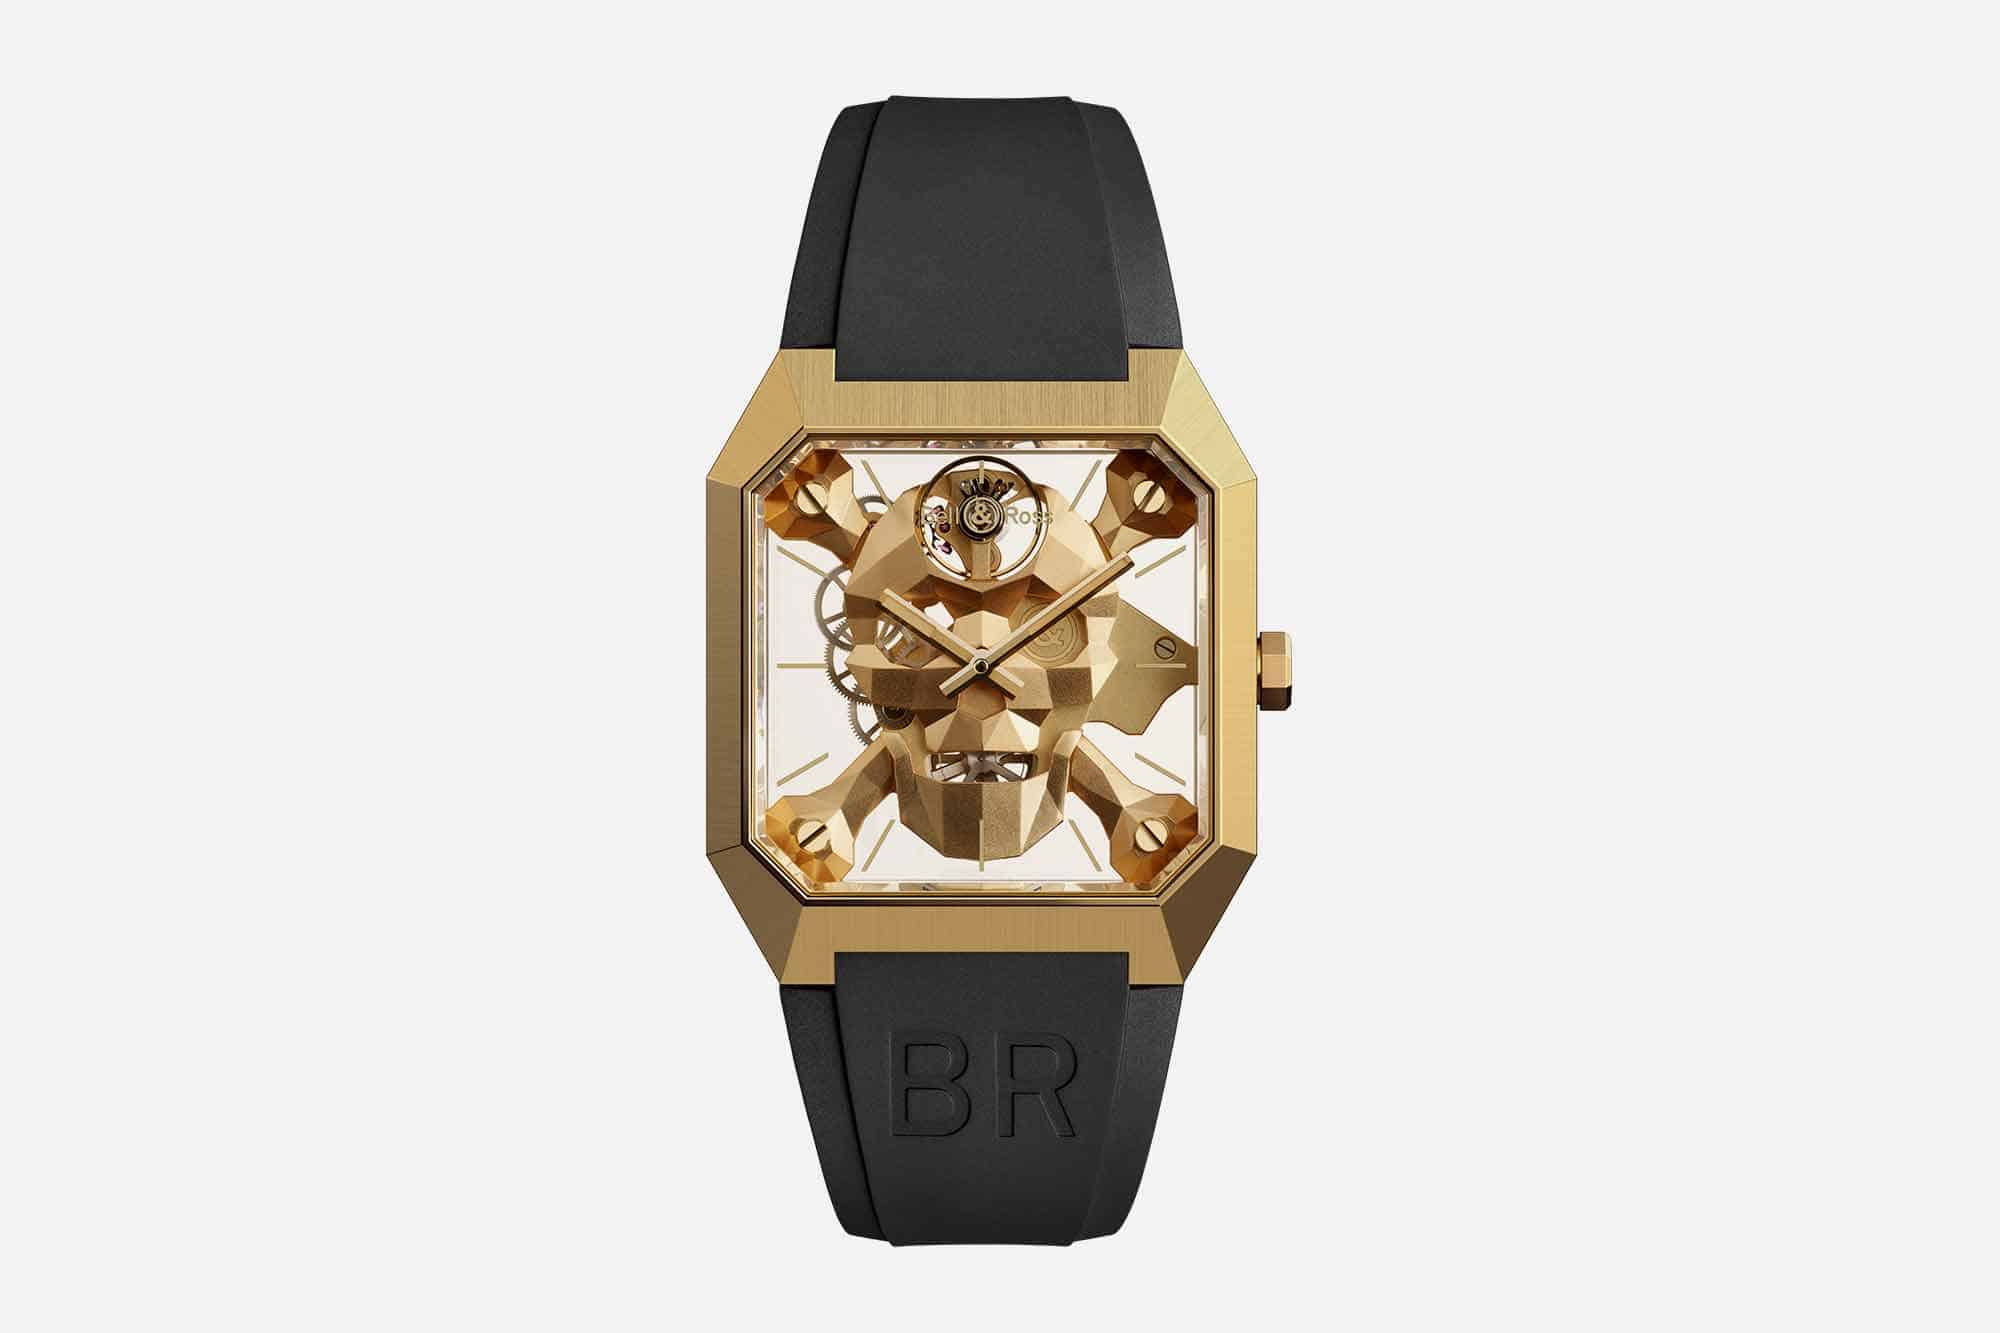 How About a Big Bronze Skull for the Wrist? Bell & Ross Has You Covered